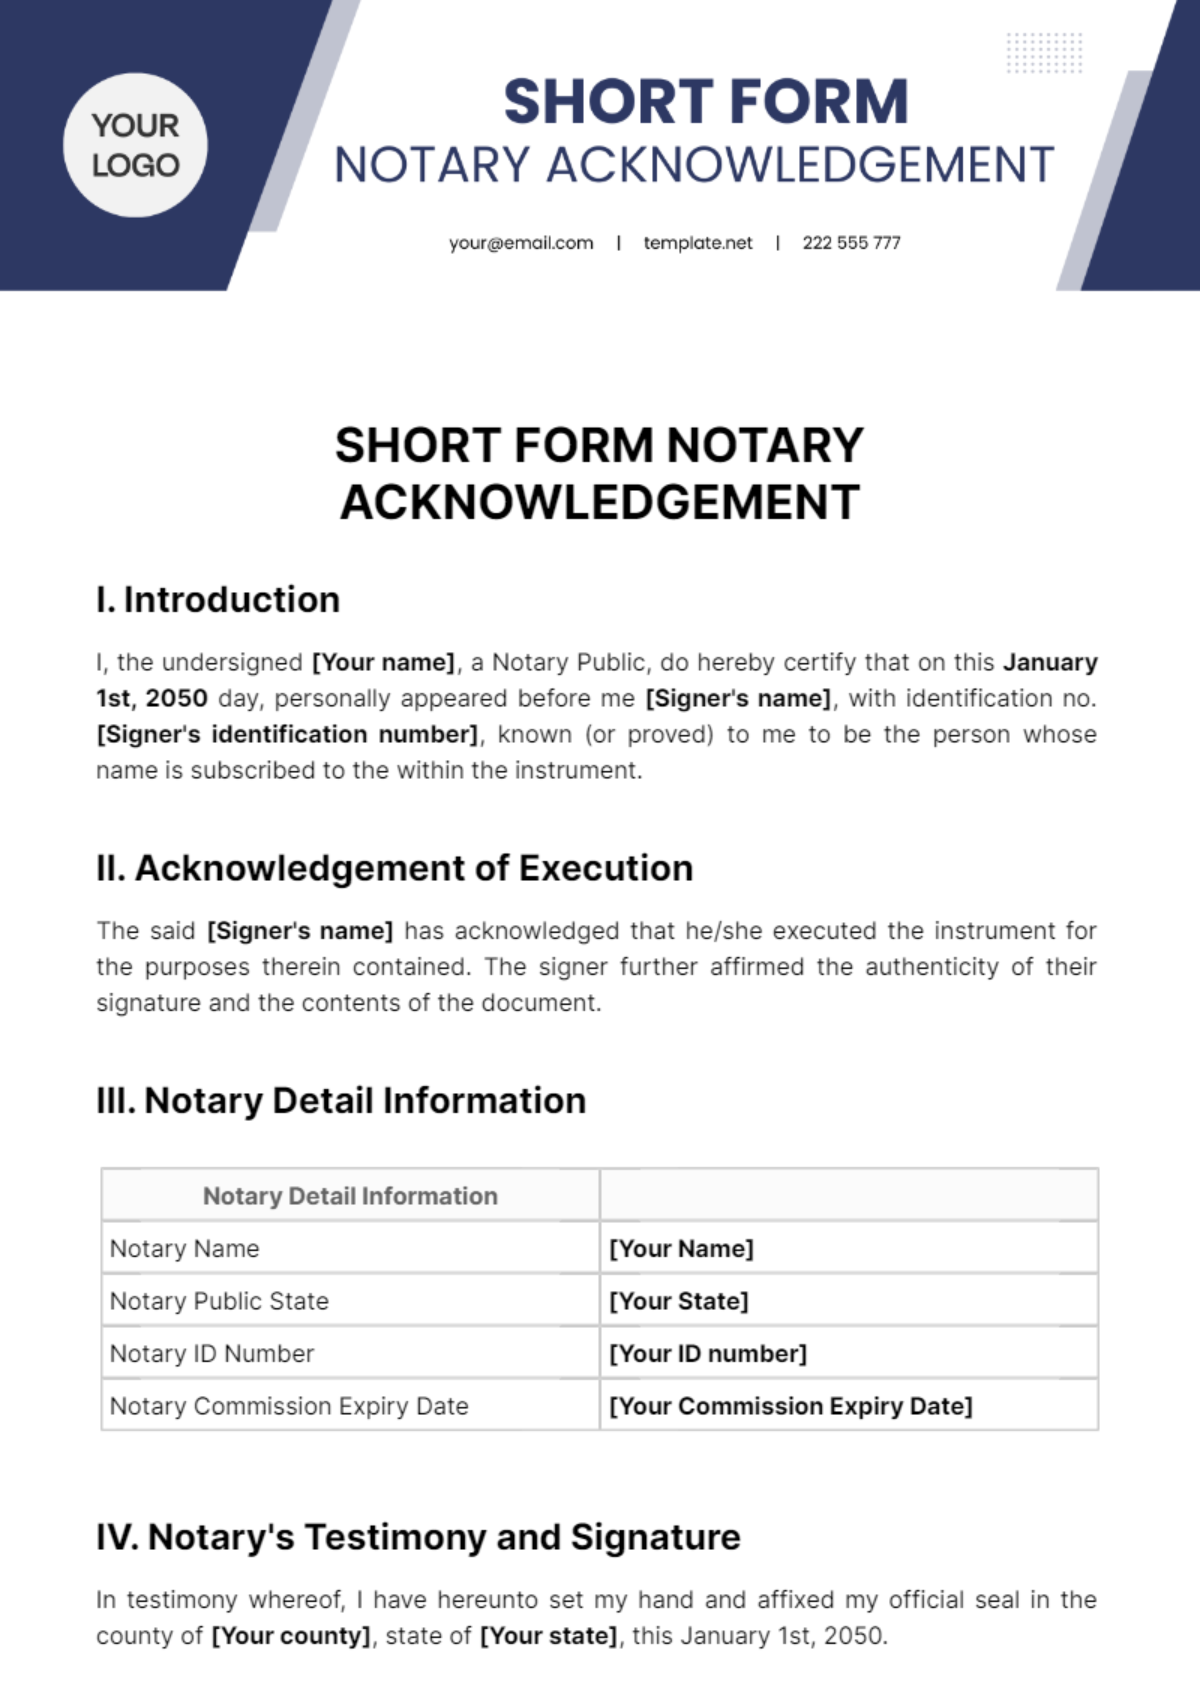 Free Short Form Notary Acknowledgement Template